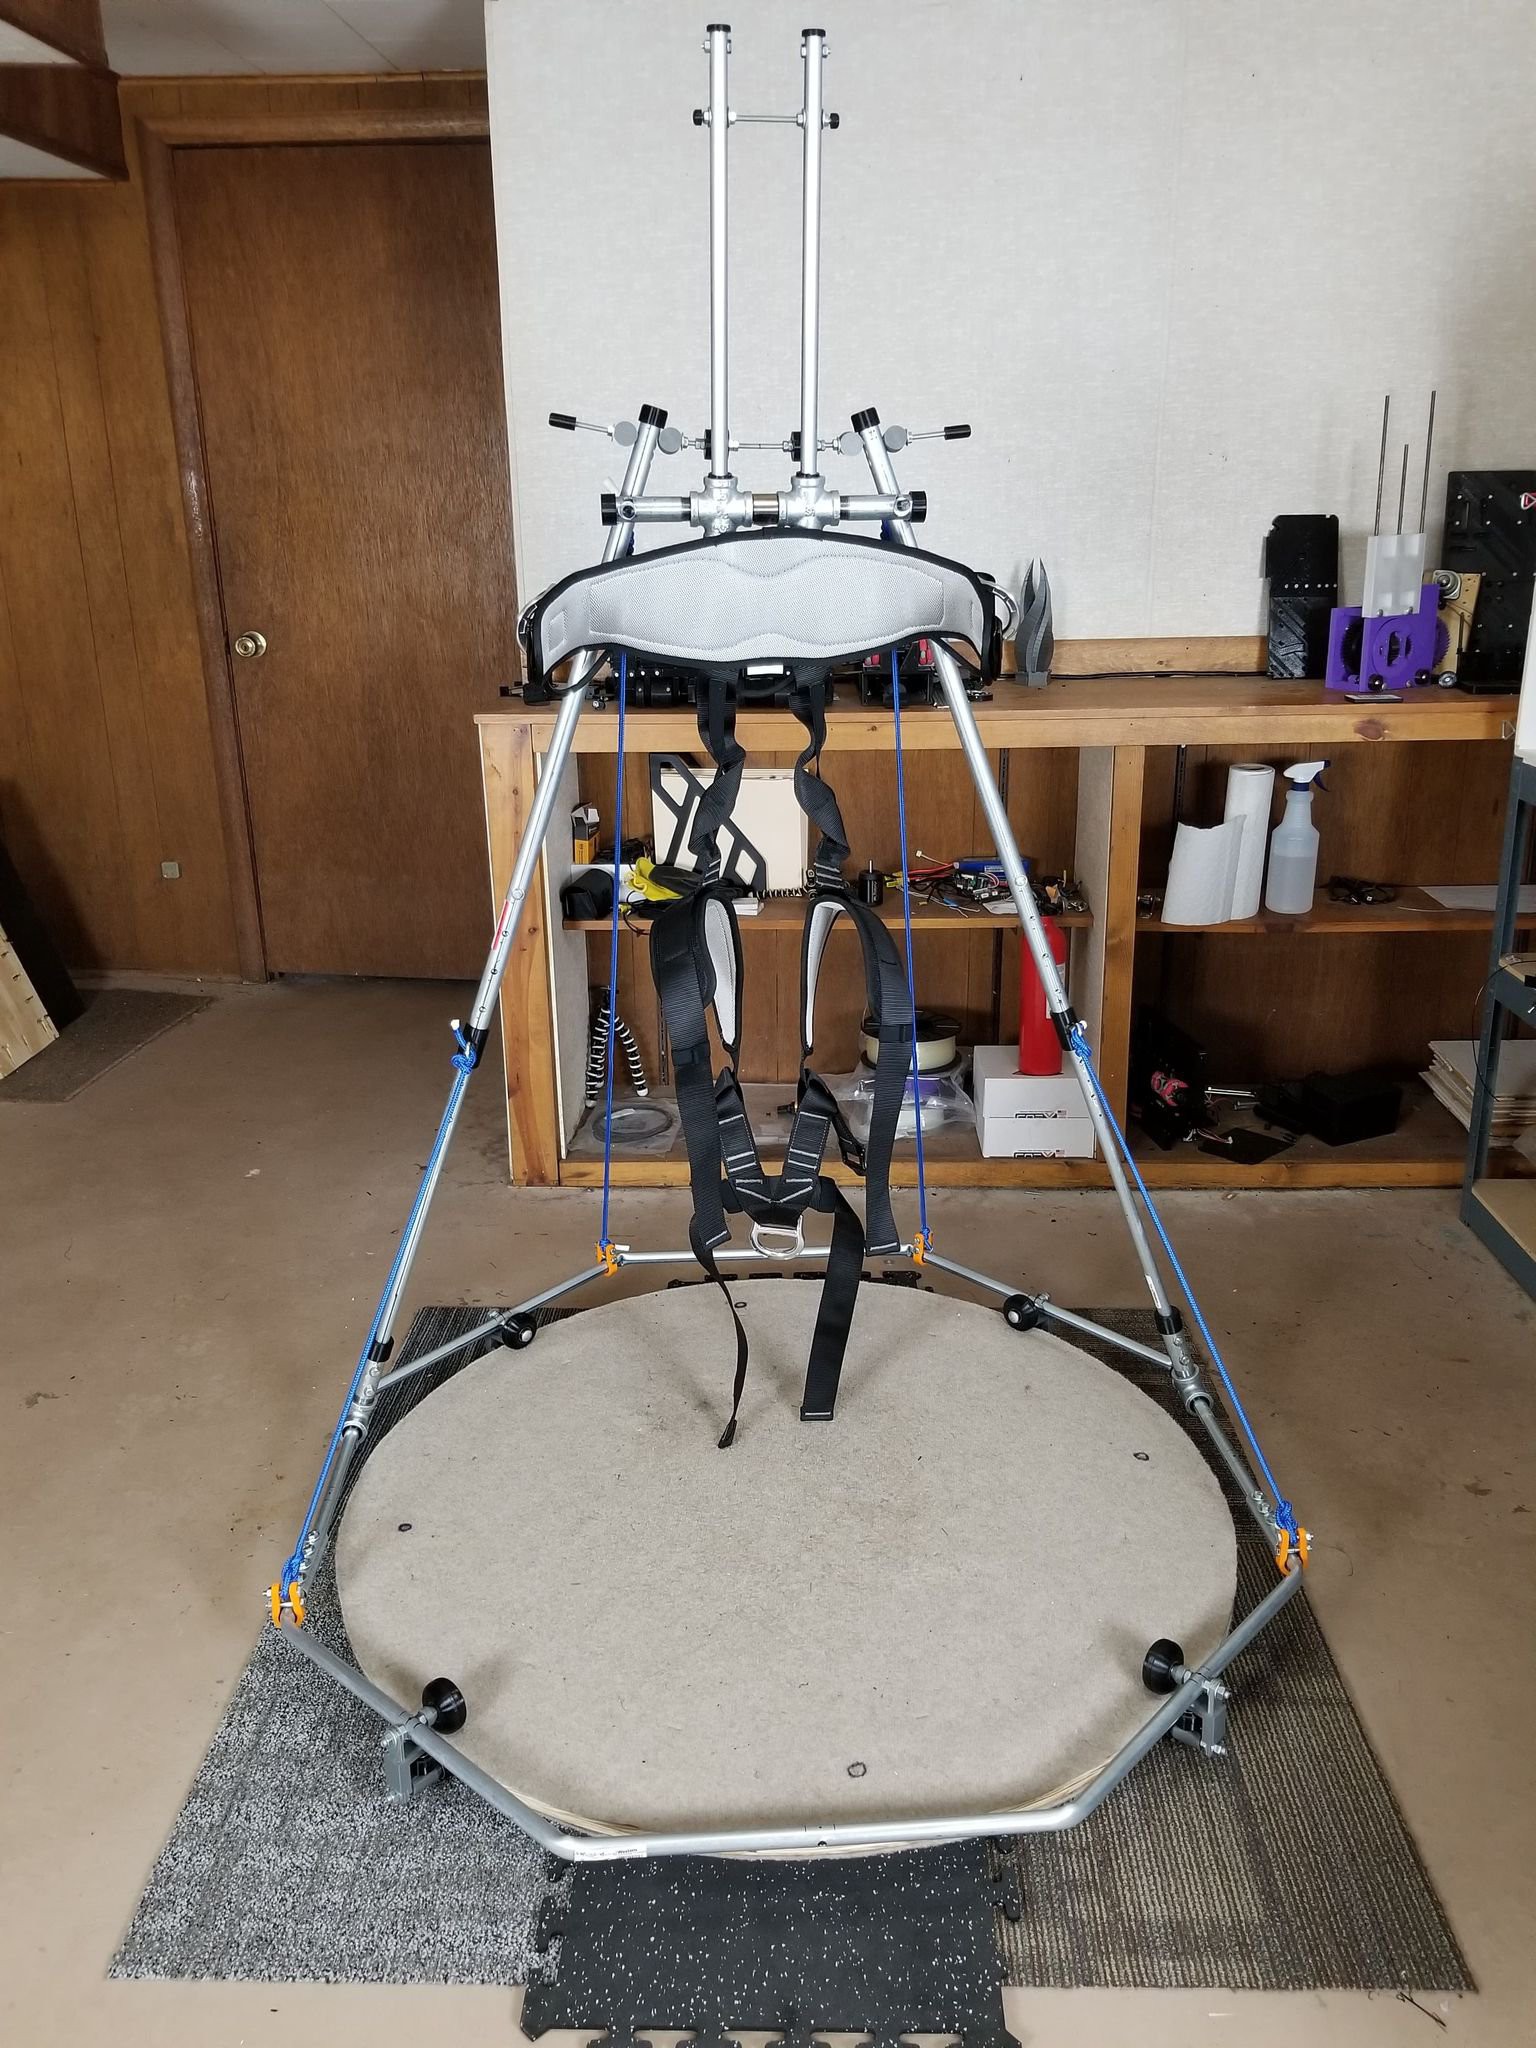 Free Standing Support Rig | Hackaday.io